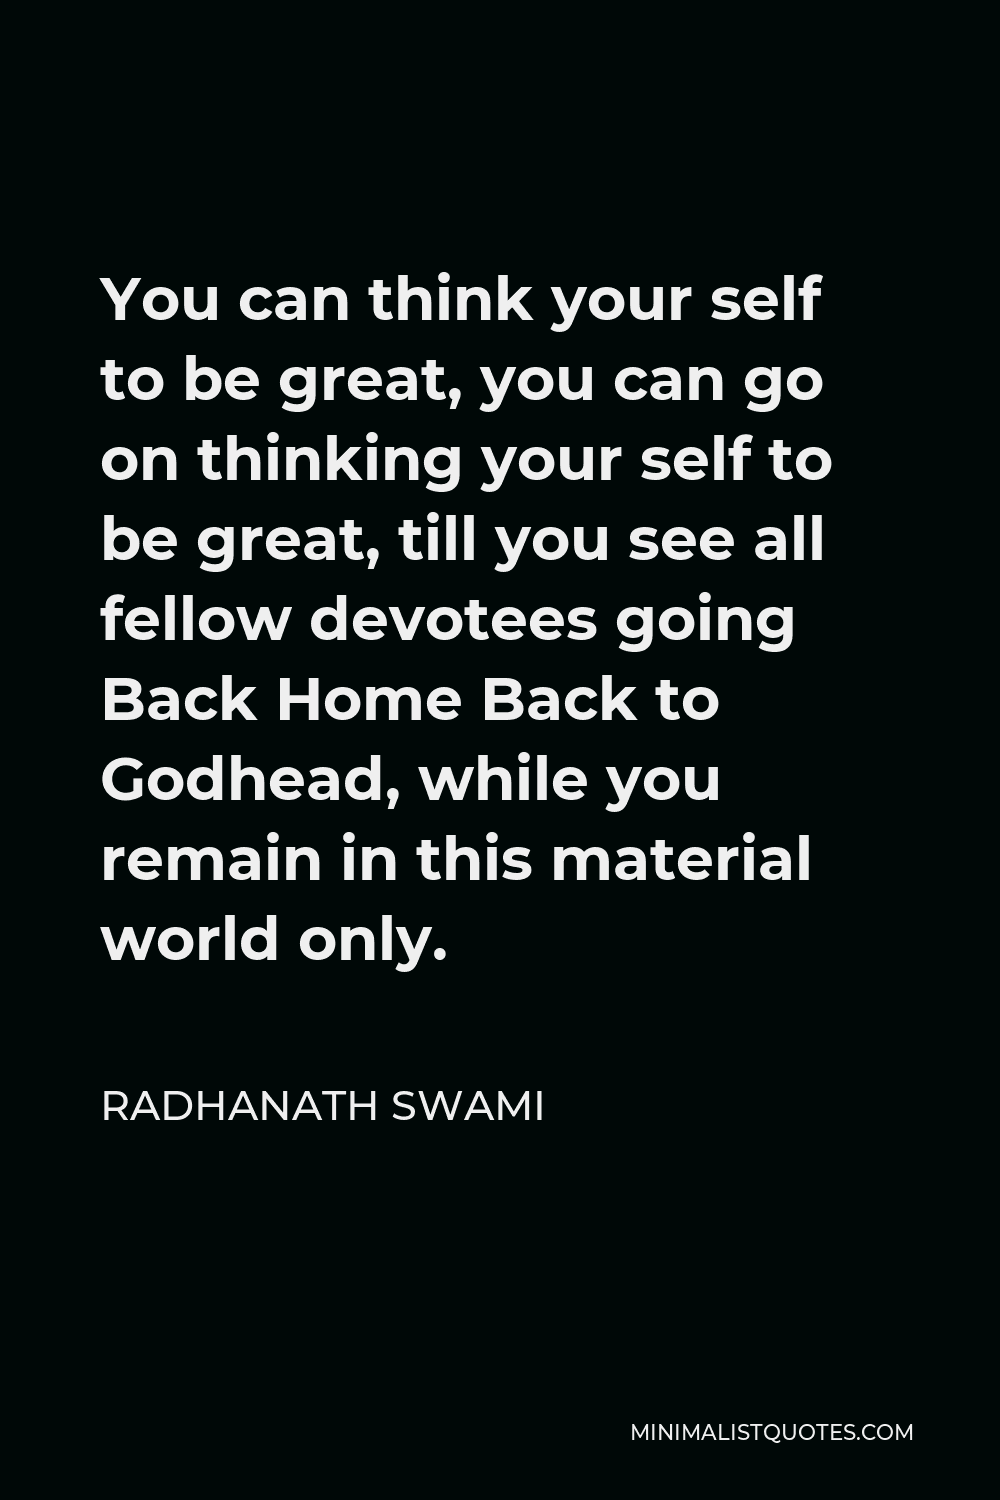 Radhanath Swami Quote - You can think your self to be great, you can go on thinking your self to be great, till you see all fellow devotees going Back Home Back to Godhead, while you remain in this material world only.